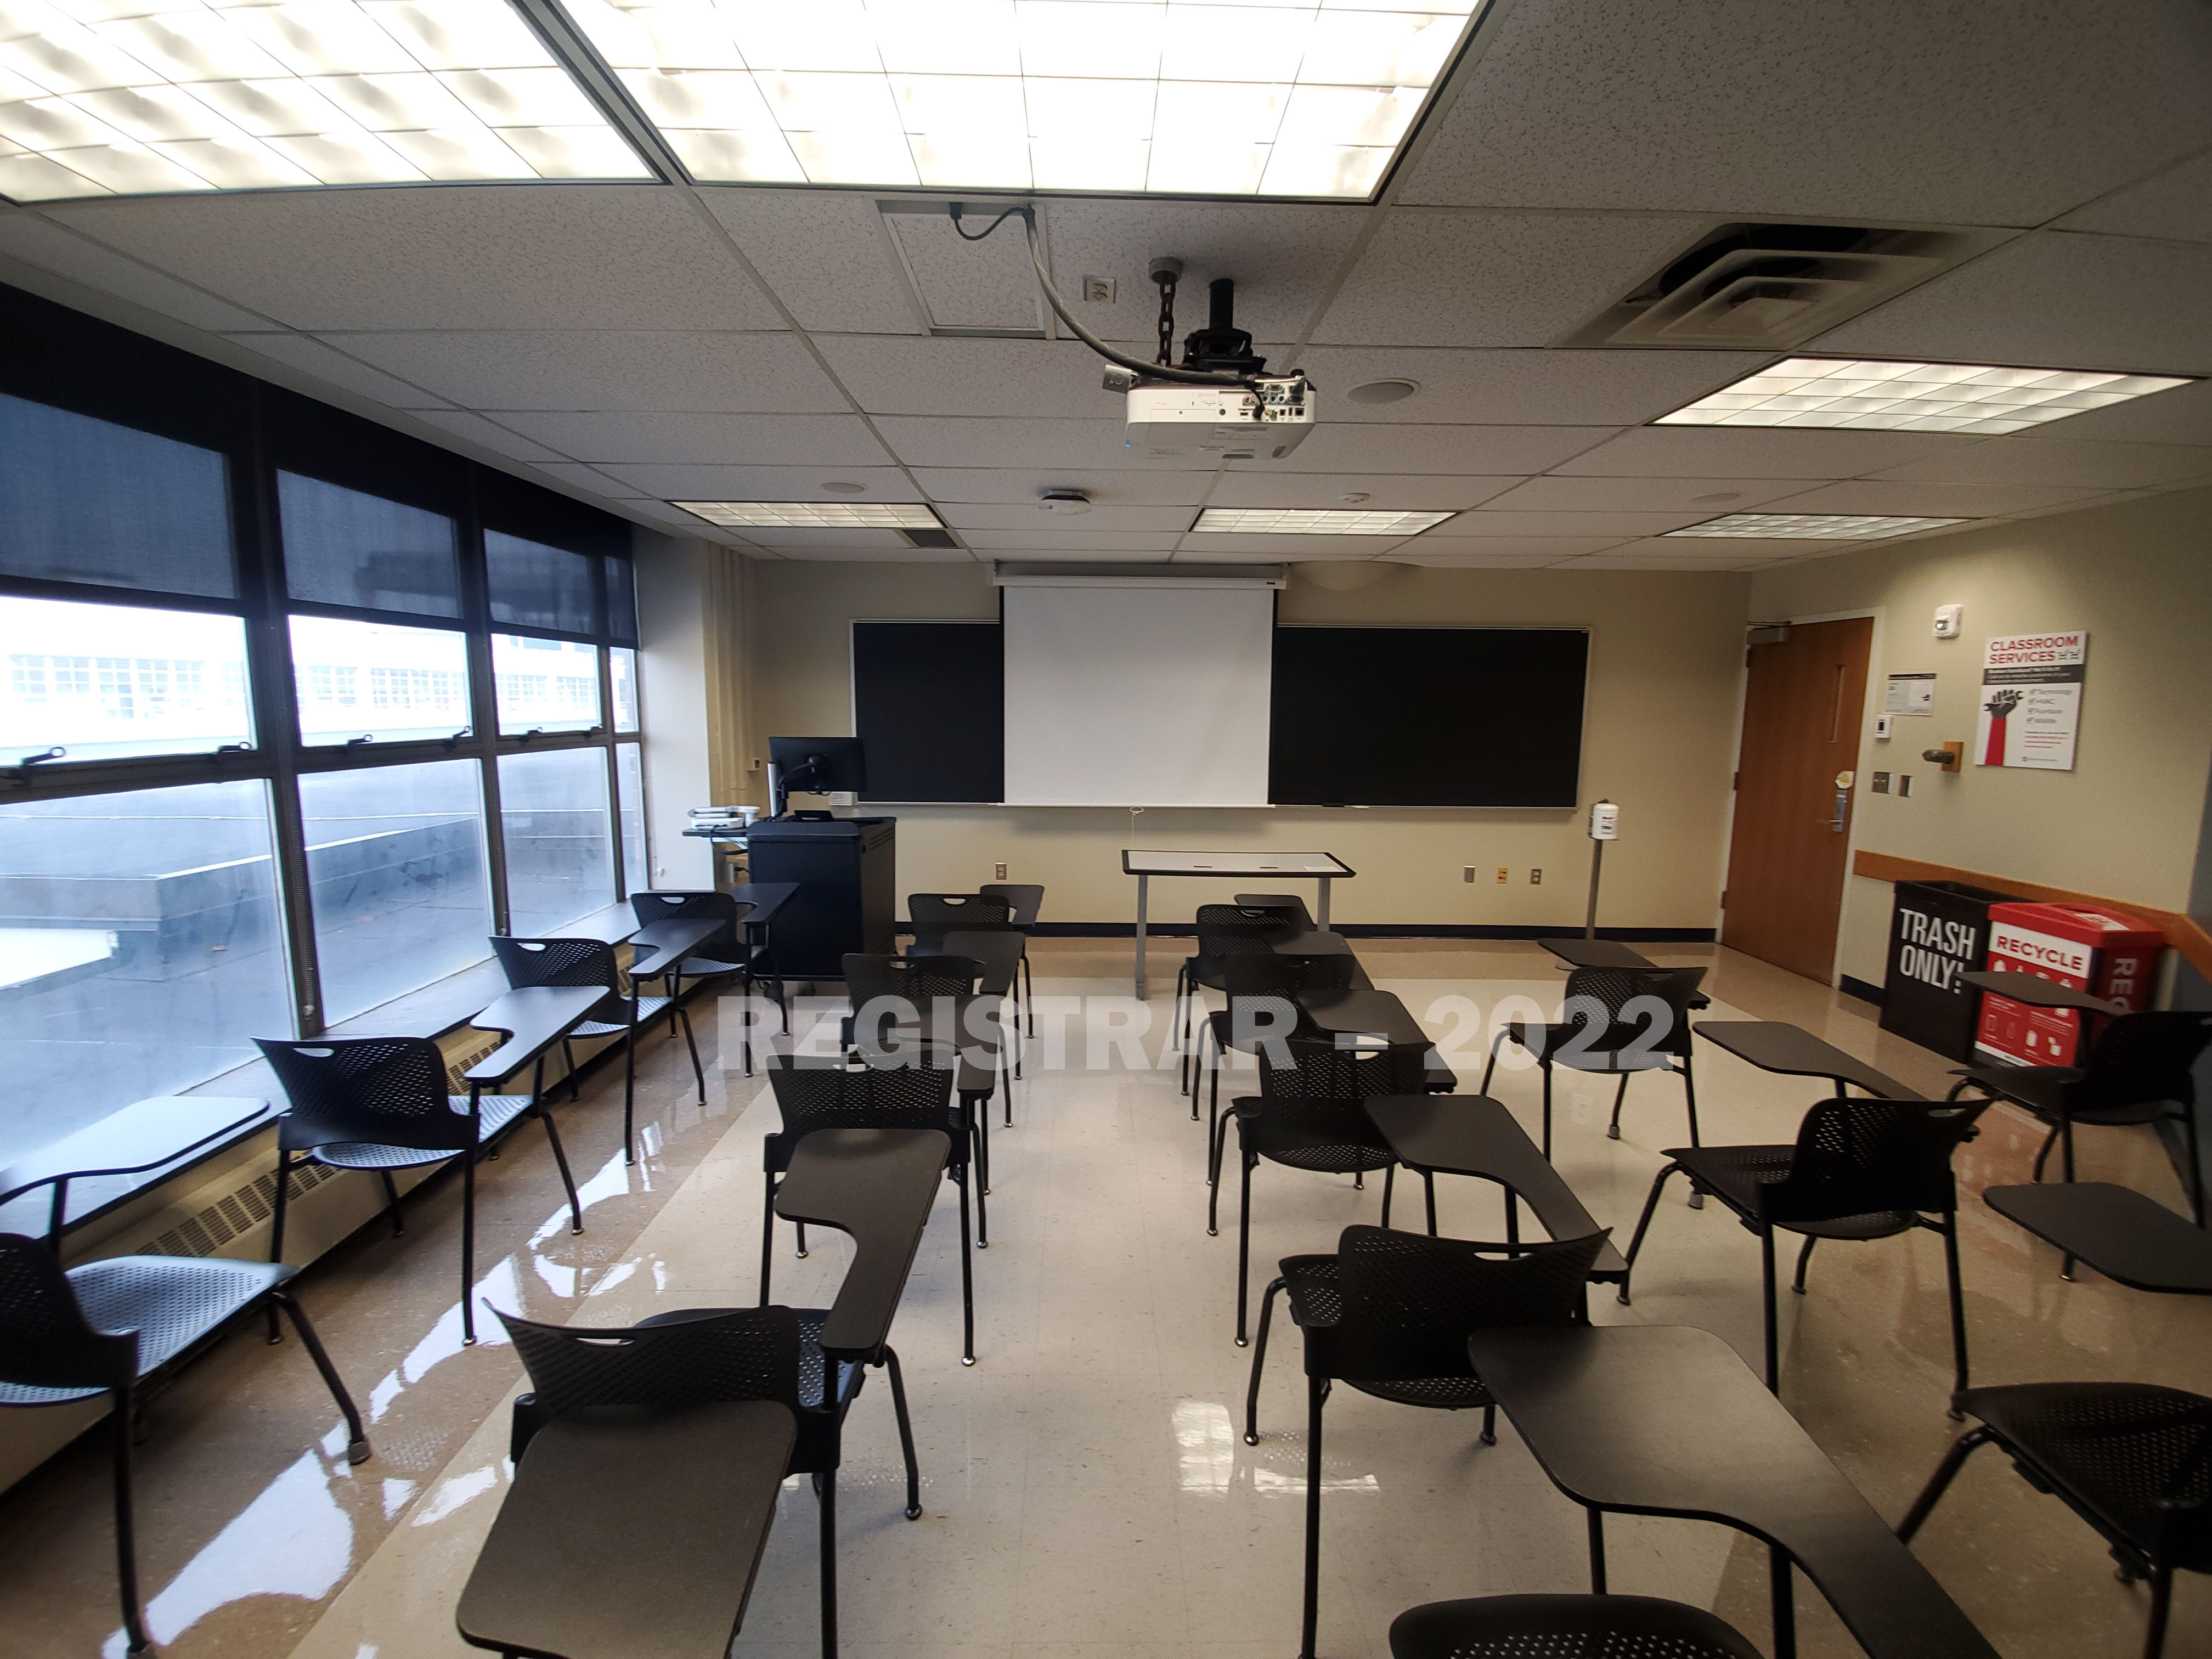 Enarson Classroom Building room 248 ultra wide angle view from the back of the room with projector screen down